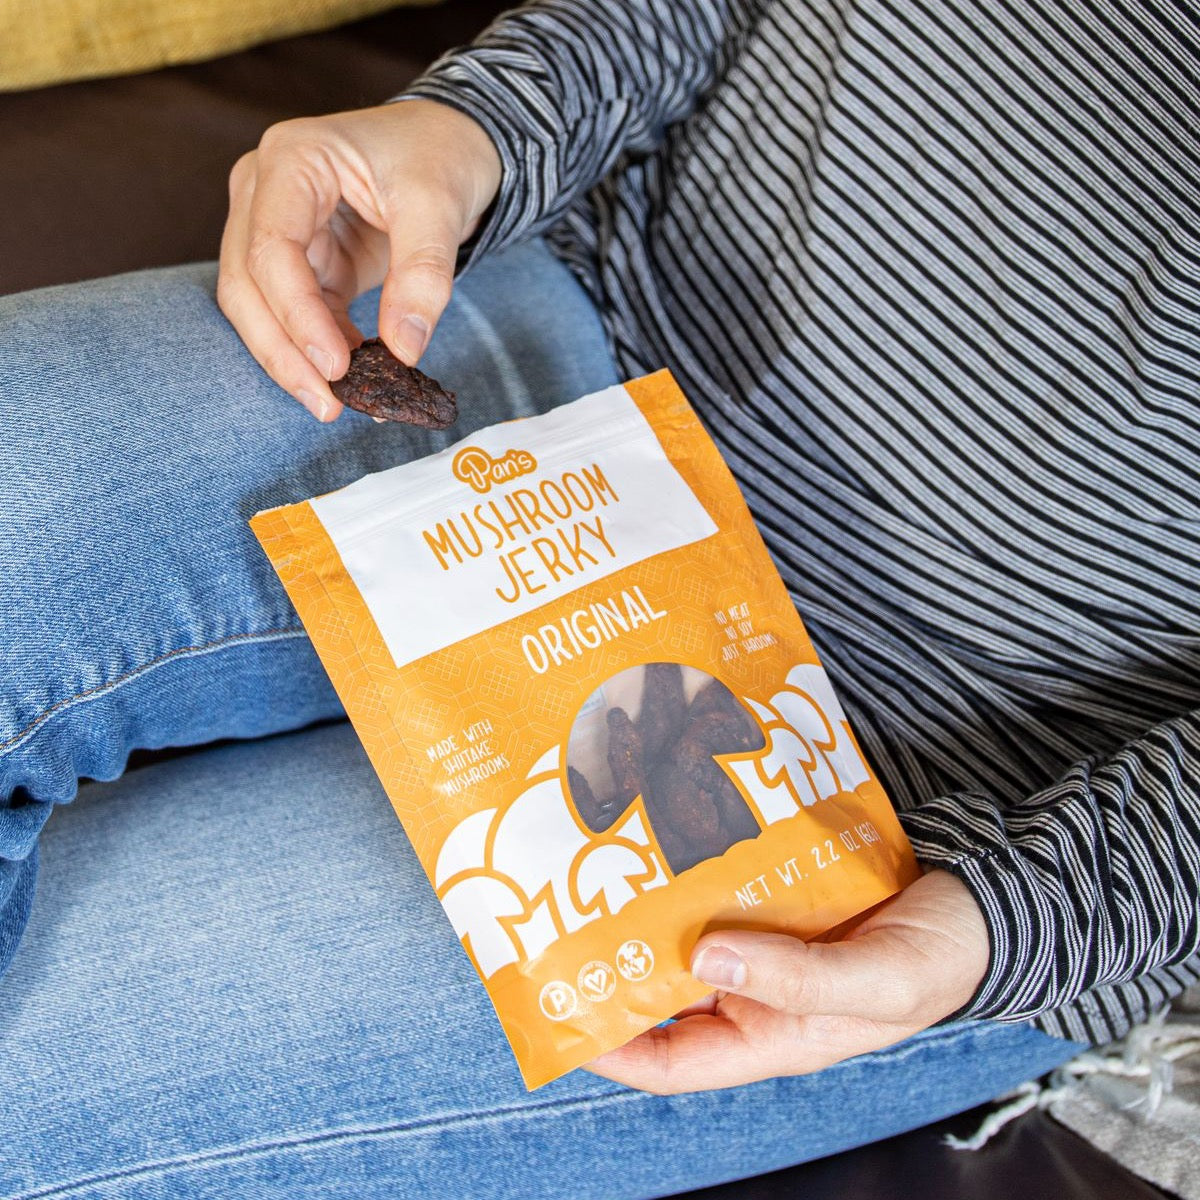 A model’s hands holds a bag of Pan’s Mushroom Jerky against their outfit of jeans and a strippped shirt. 